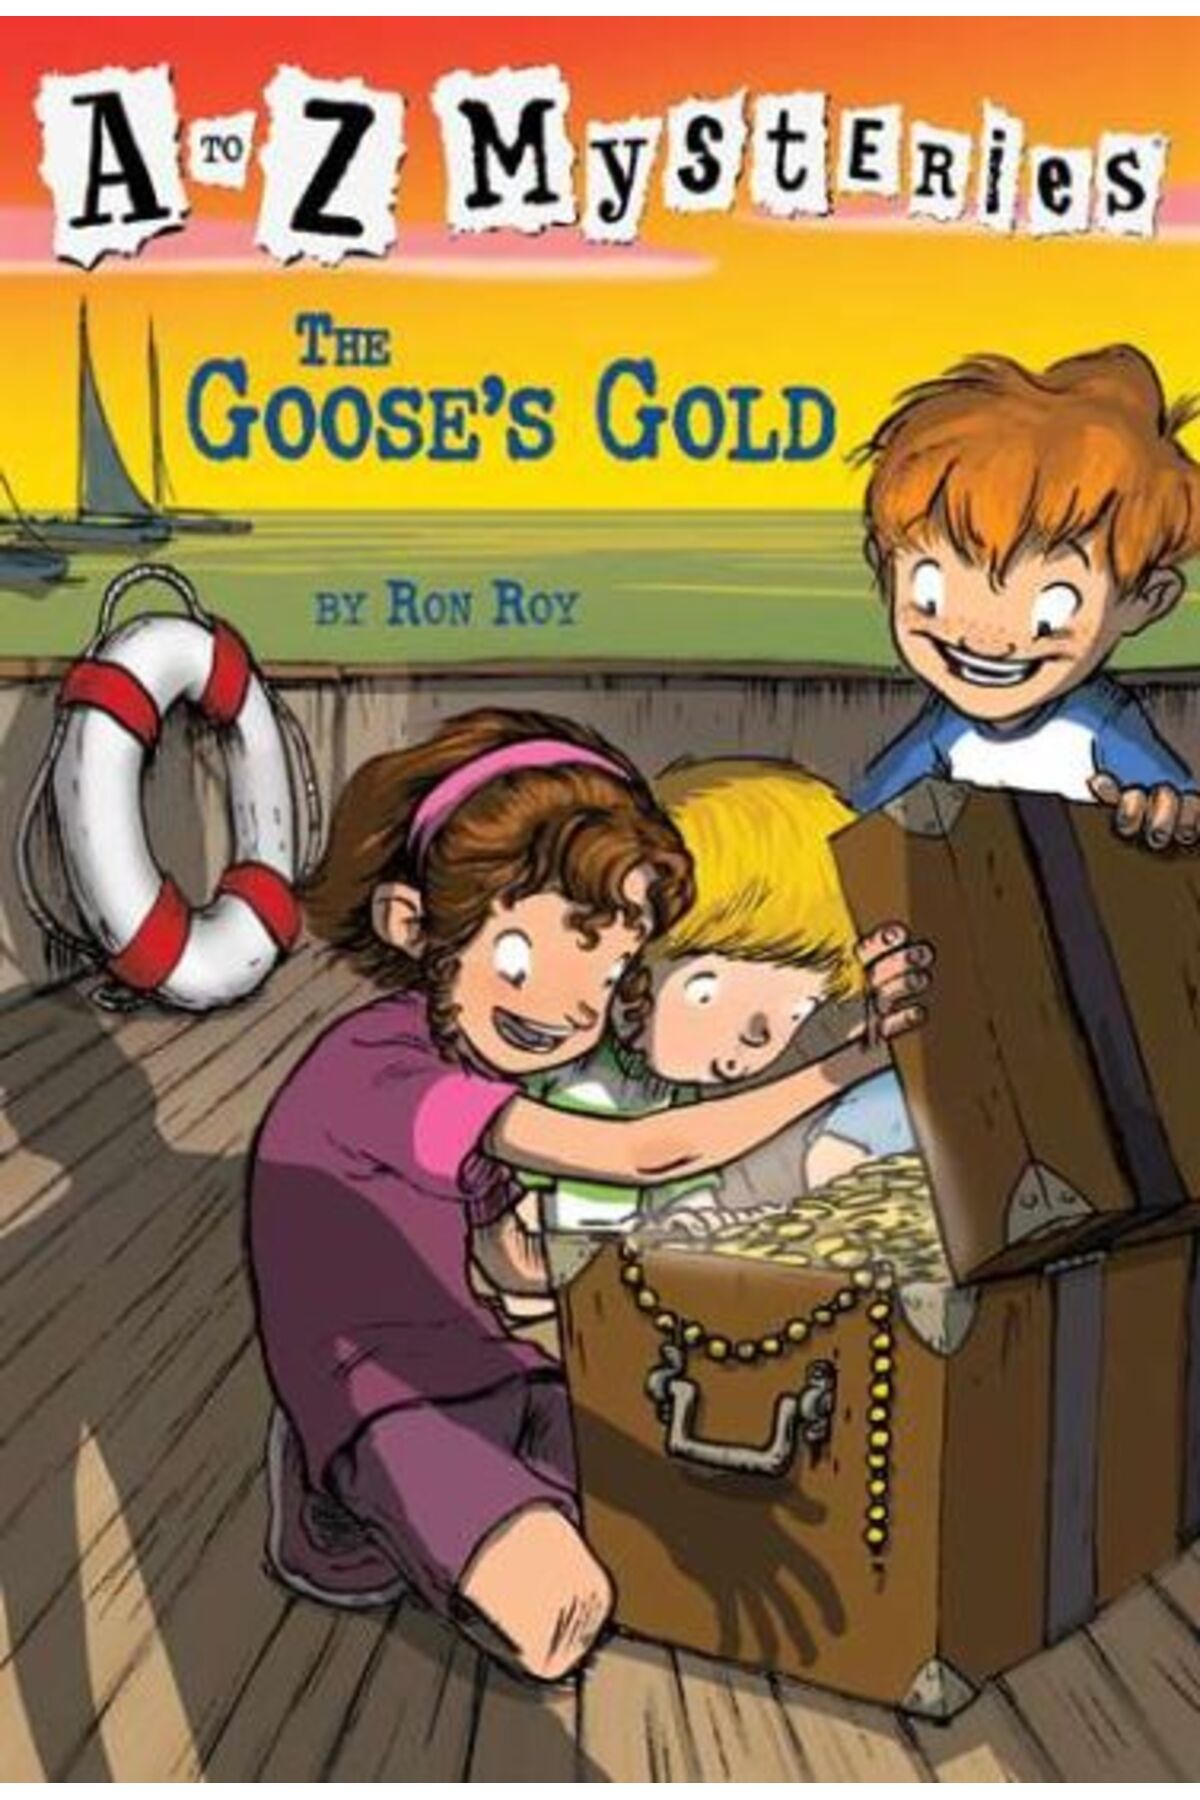 AnkaKitabevi A to Z Mysteries: The Goose's Gold